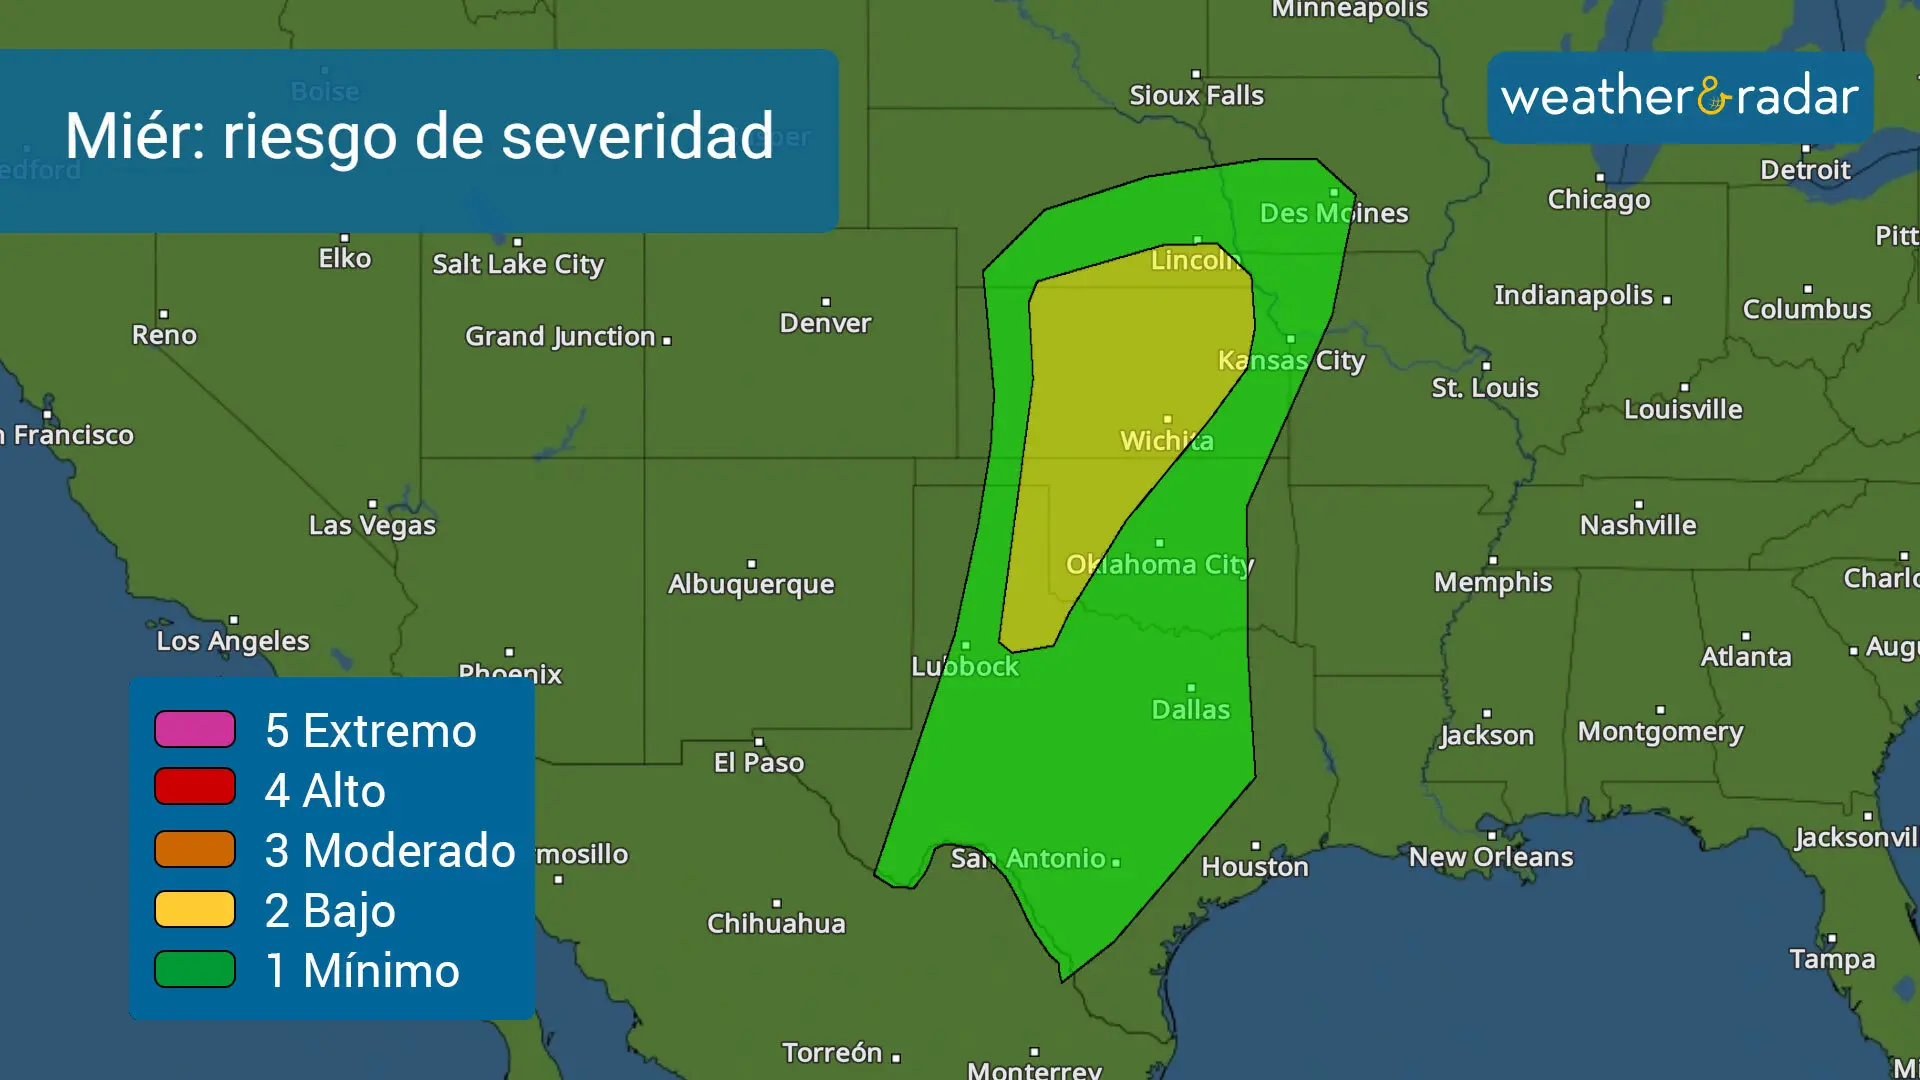 Another system intensifies and renews the severe risk across the Central Plains. 